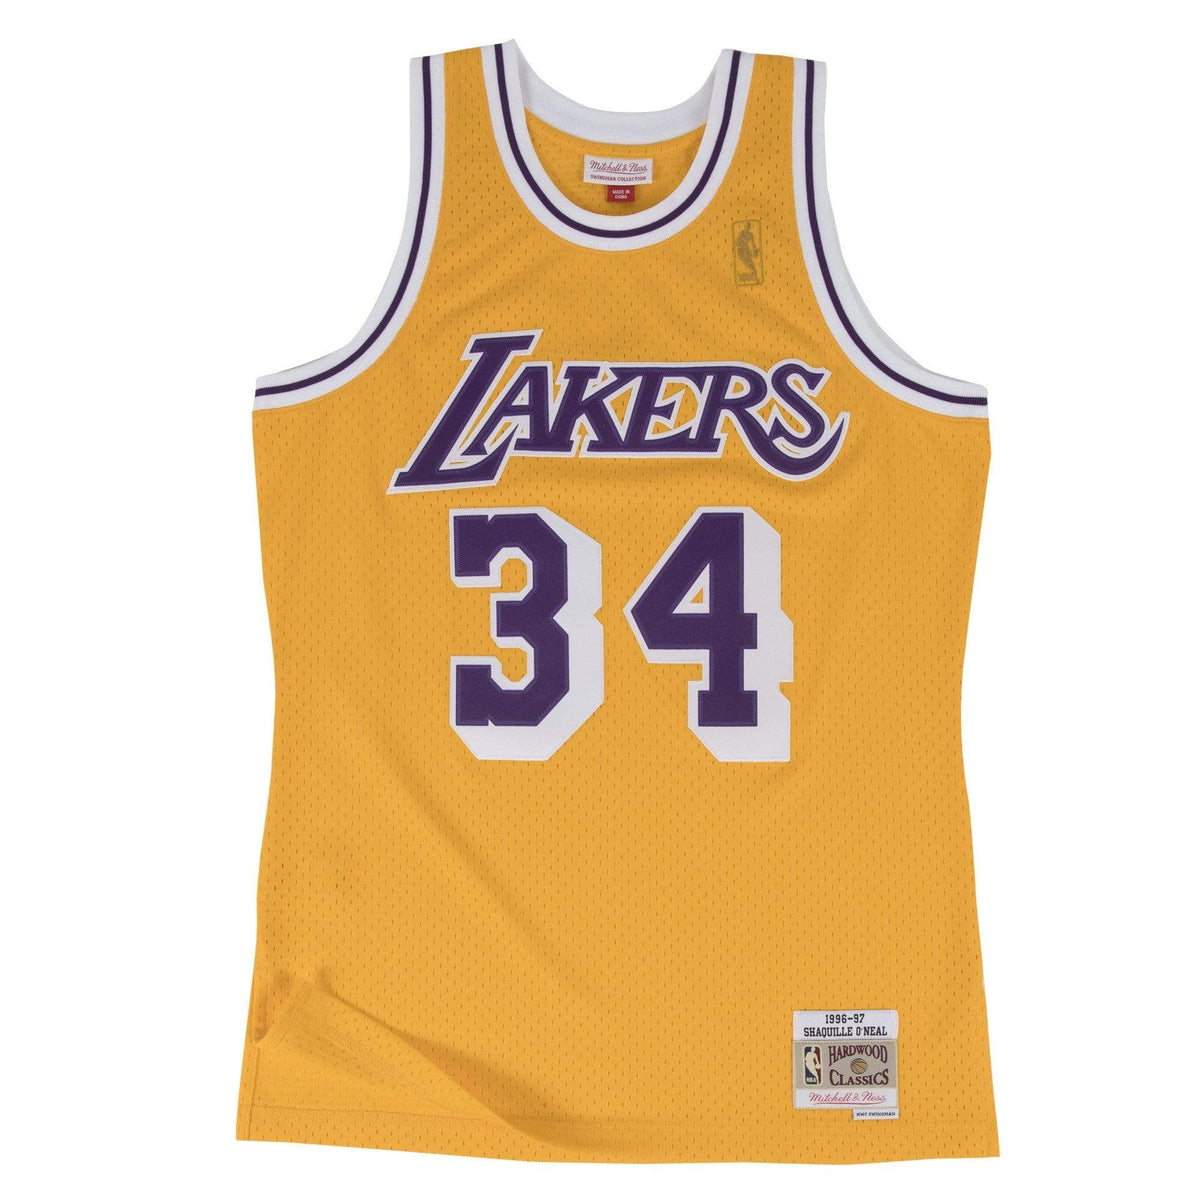 Mitchell & Ness Shaquille O'Neal Los Angeles Lakers 1996-97 Swingman Jersey Medium